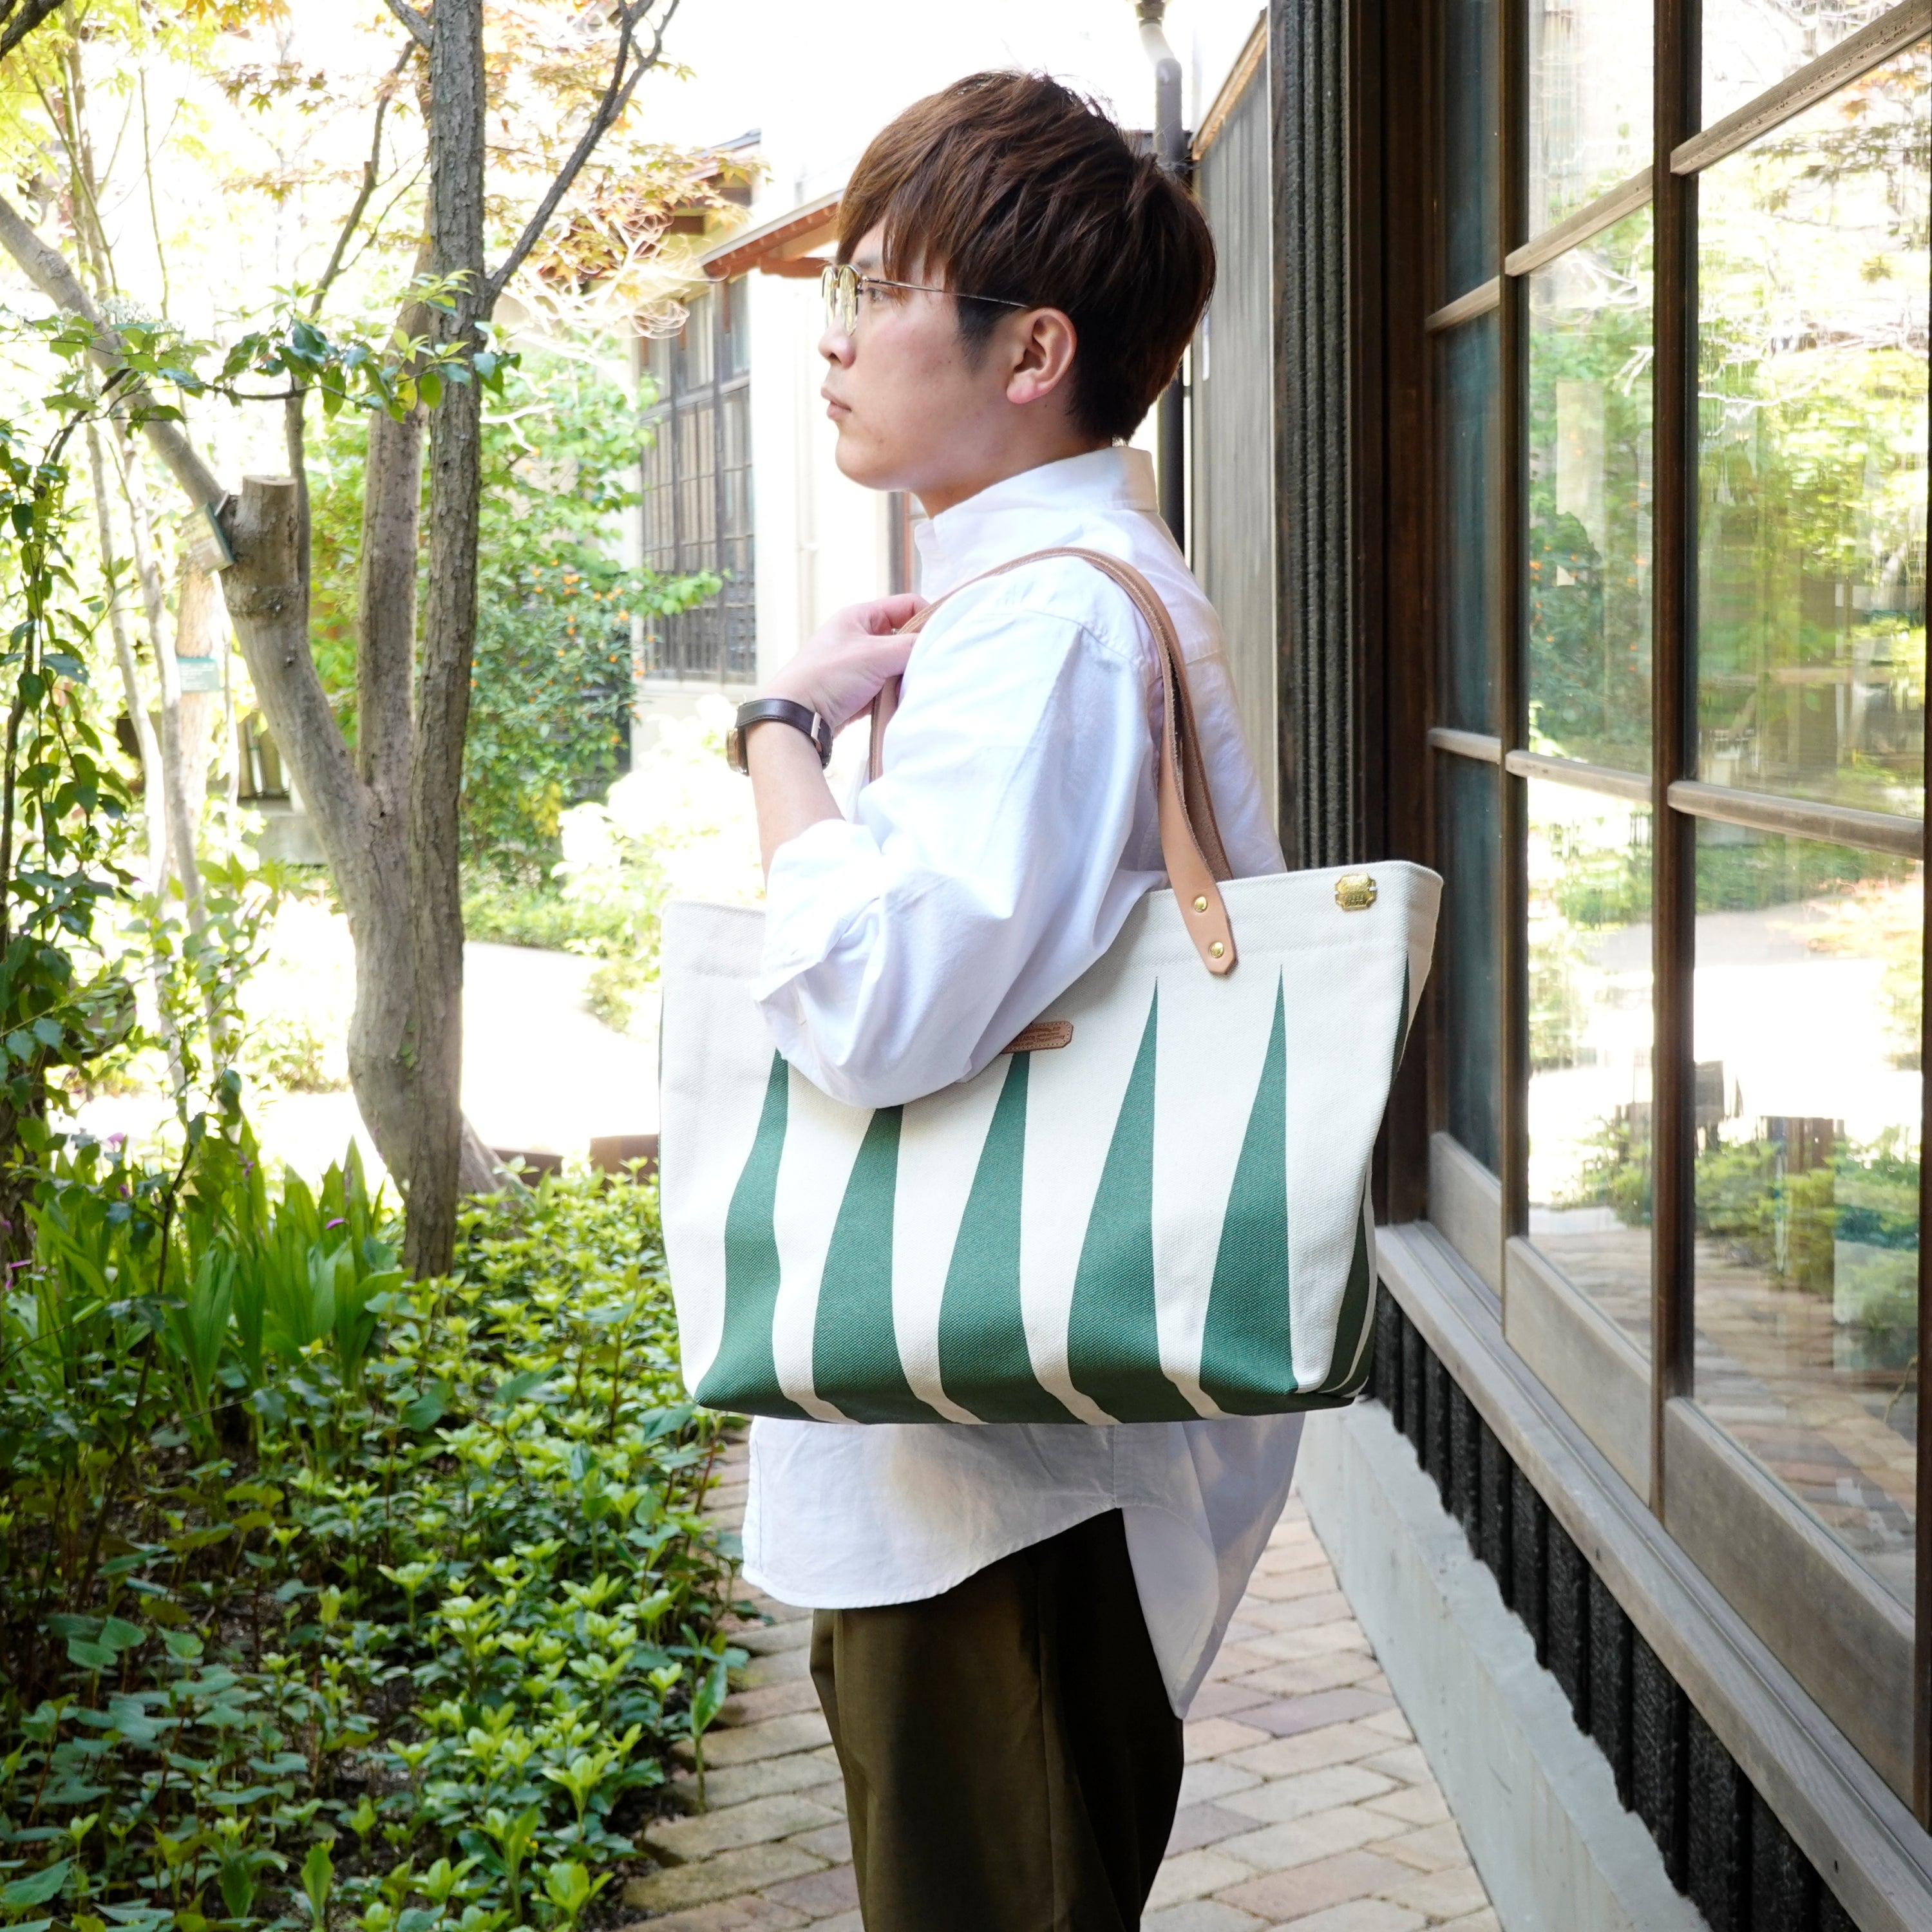 SL0826 paint canvas tote bag spike